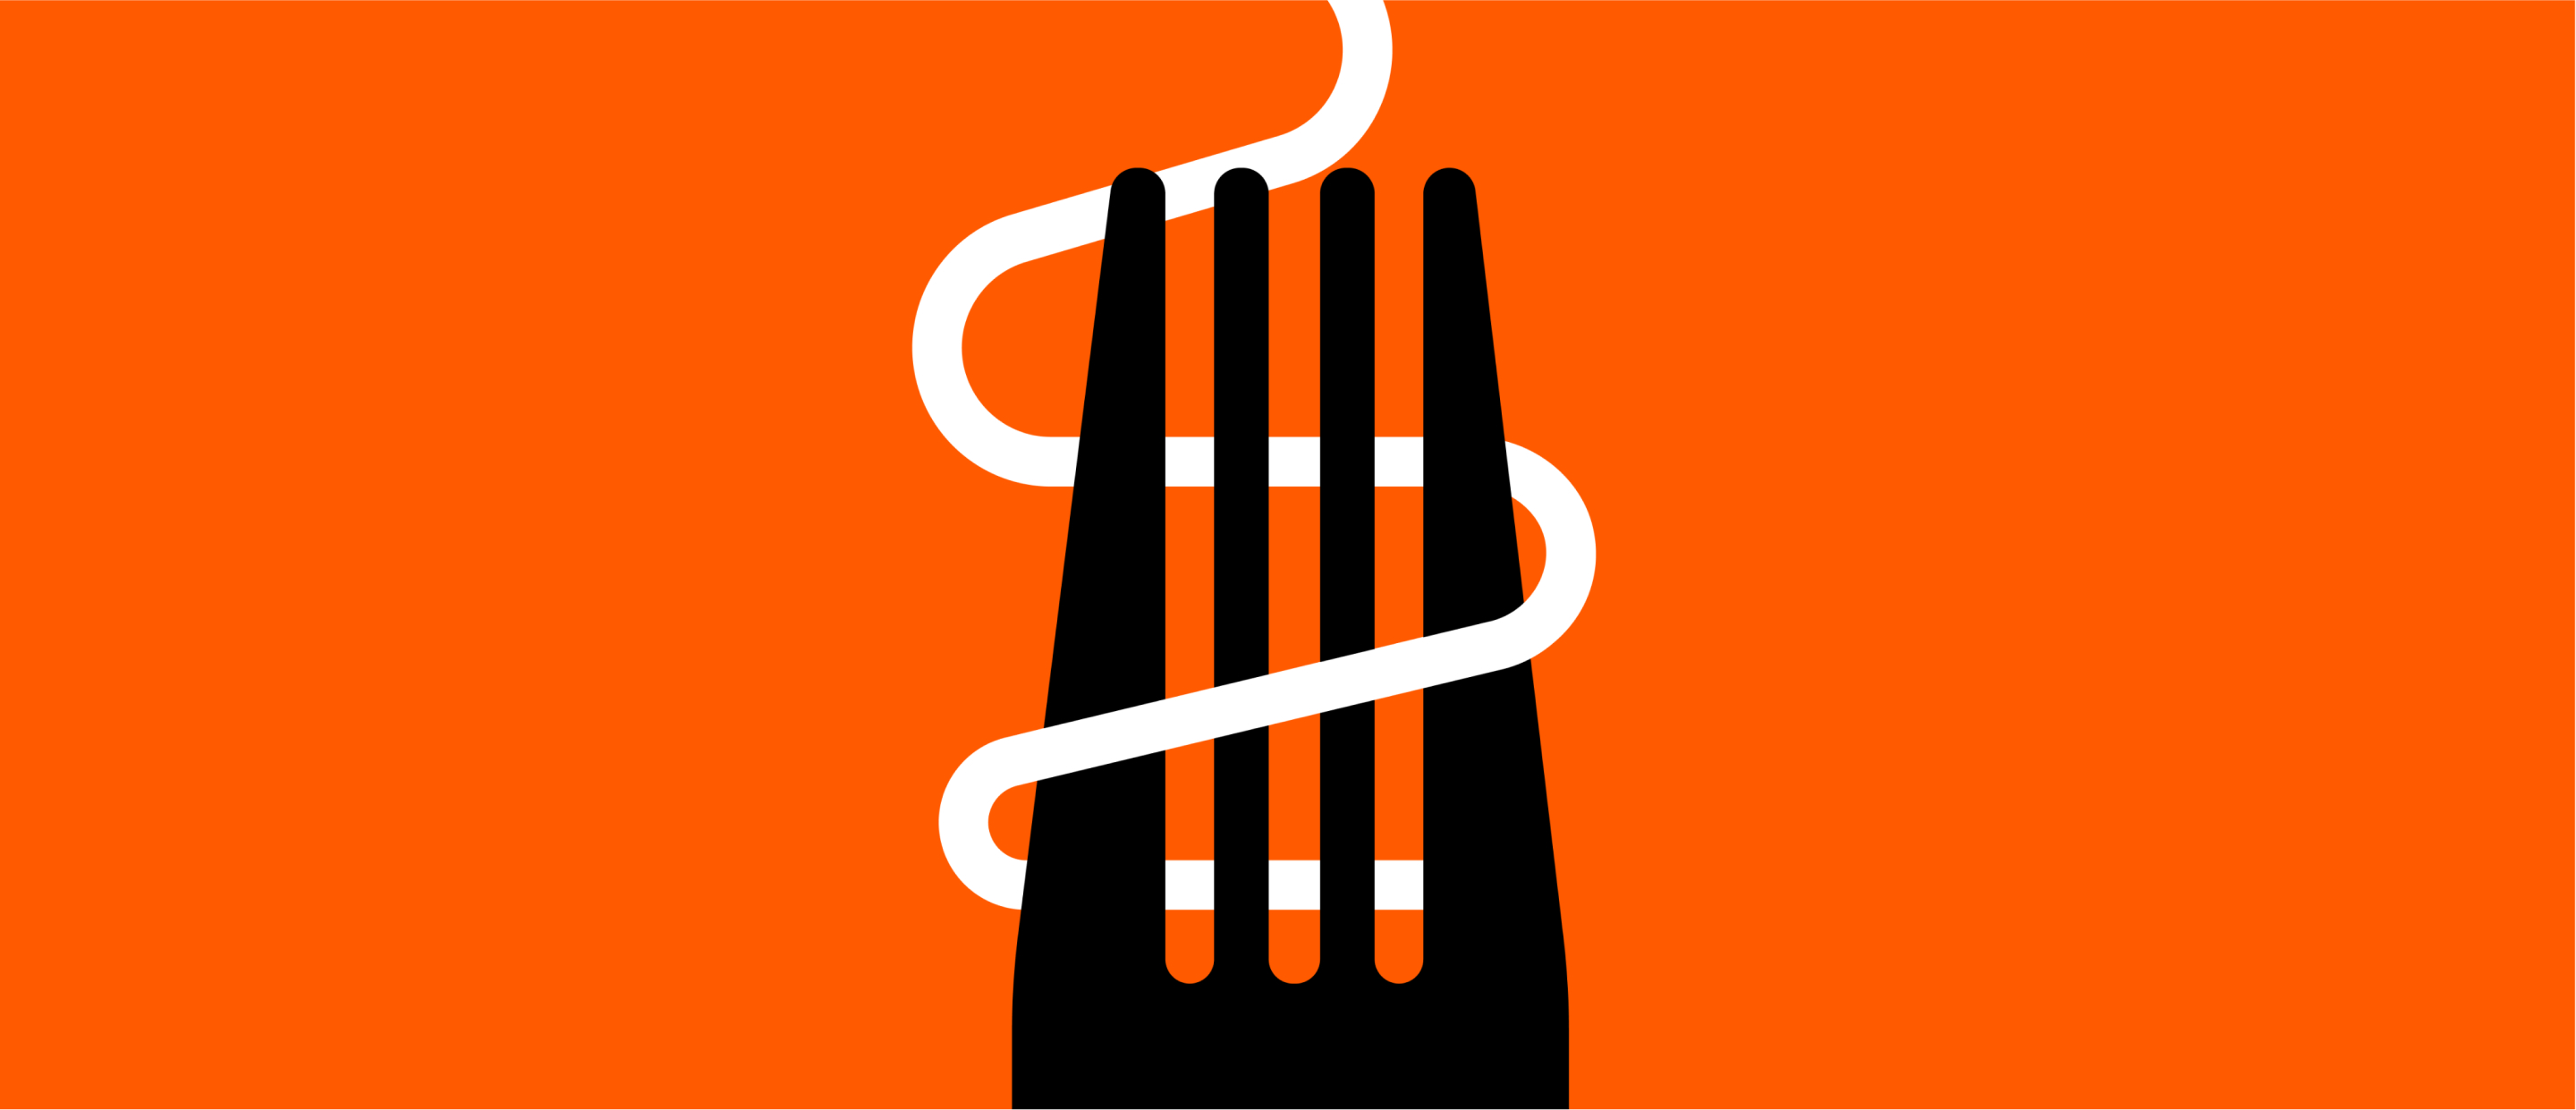 illistration of a black fork against an orange background with a single strand of spaghetti wrapped around the fork 